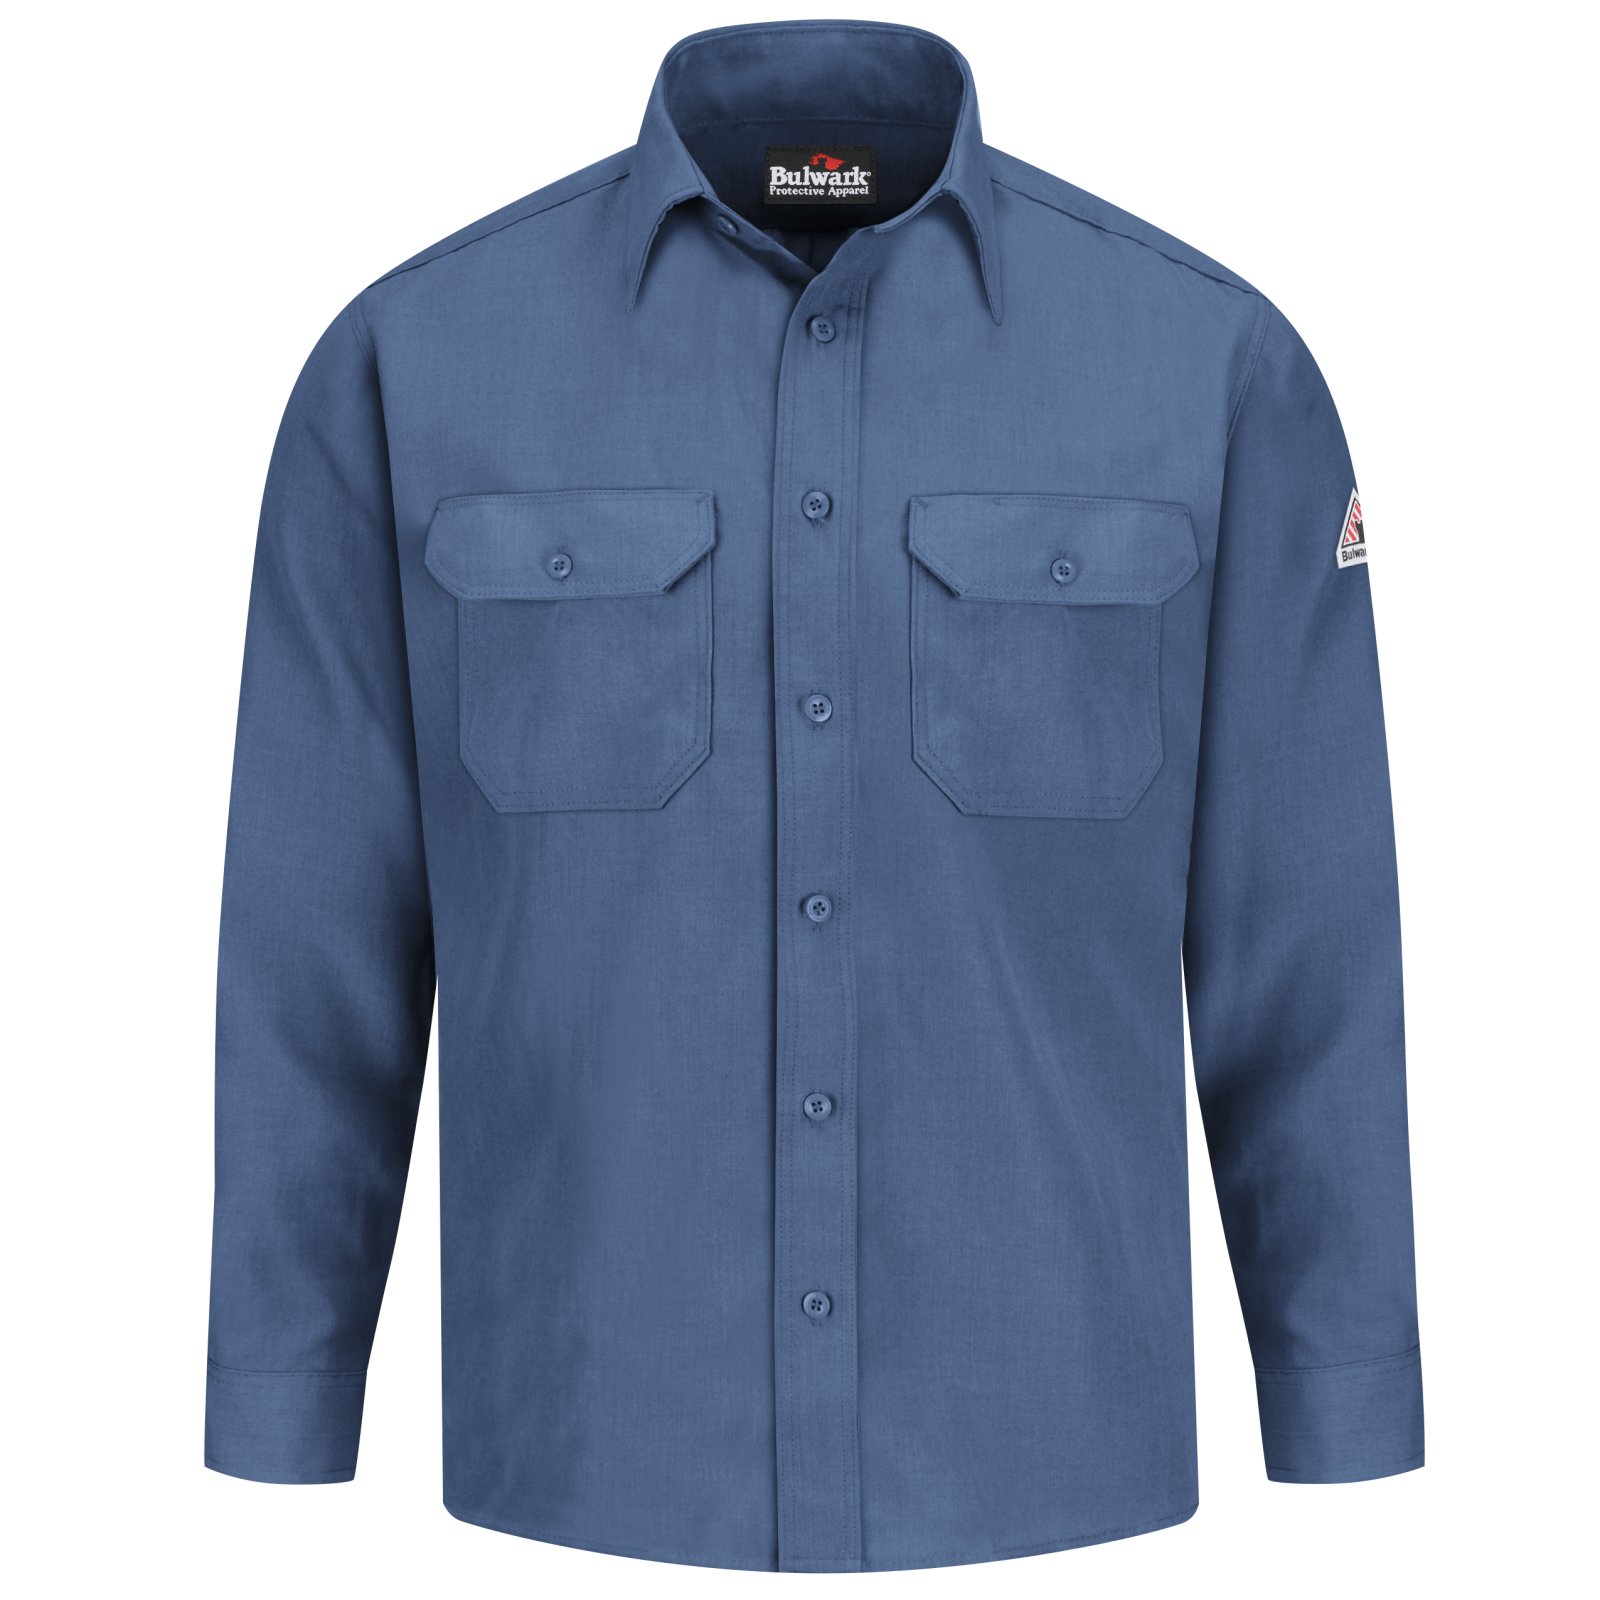 Bulwark Mens Flame Resistant 7 Oz Cotton Work Shirt with Sleeve Vent 